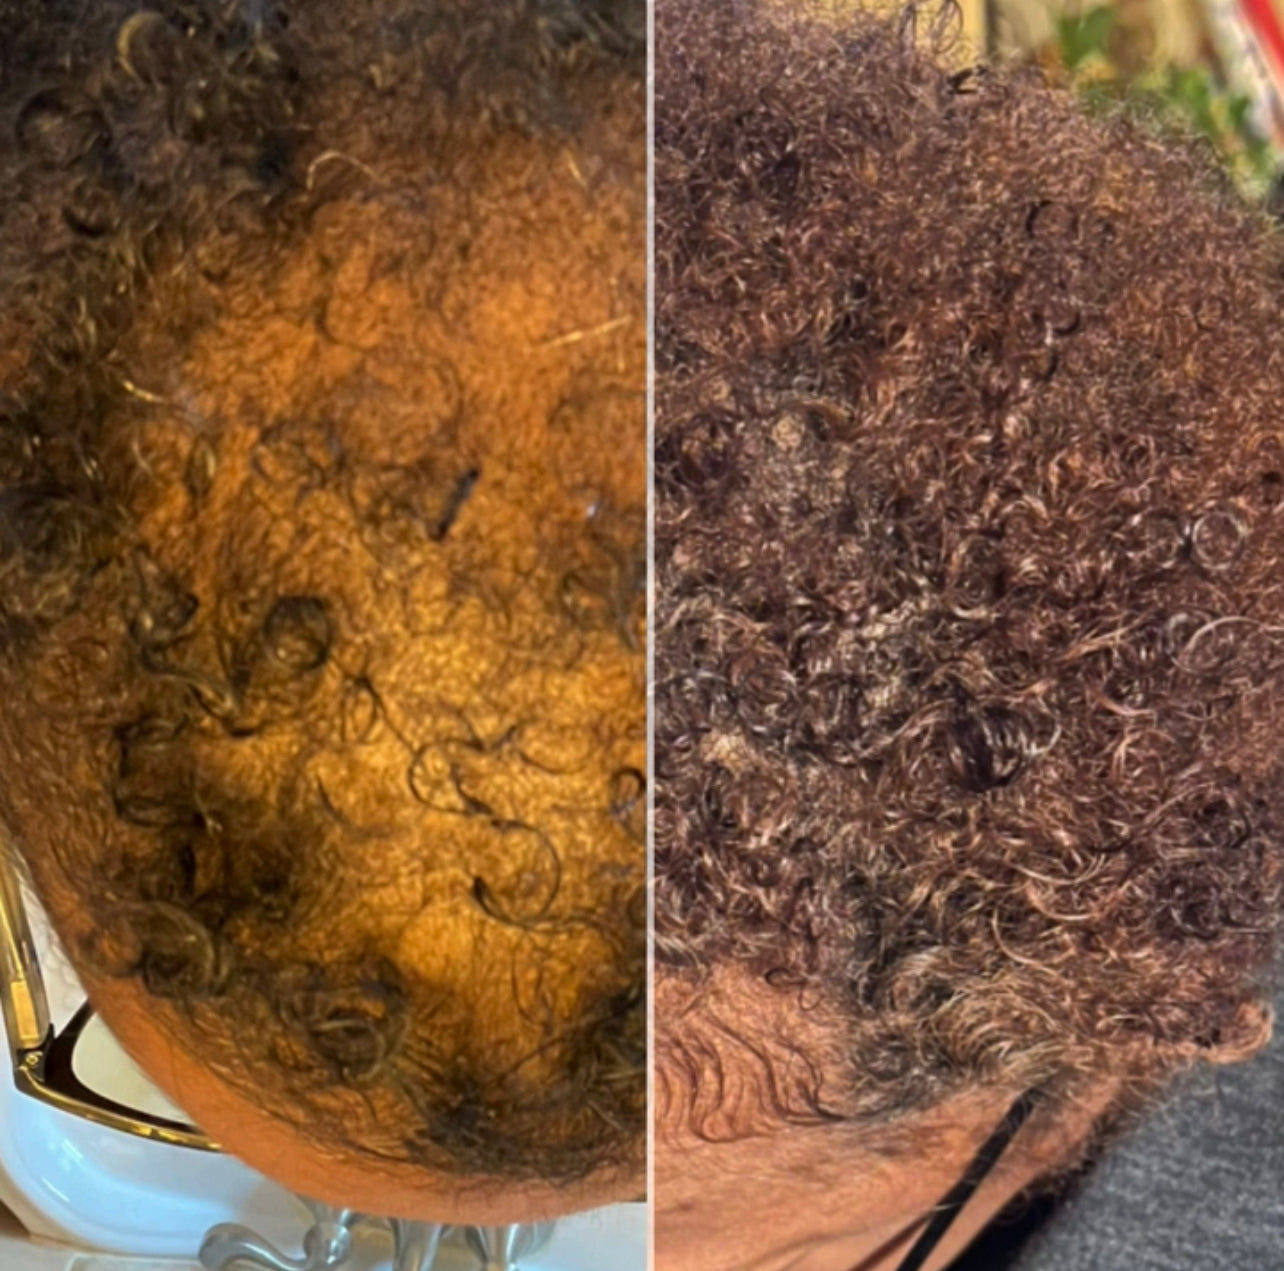 HERSHE GROWTH OIL BEFORE AND AFTER 